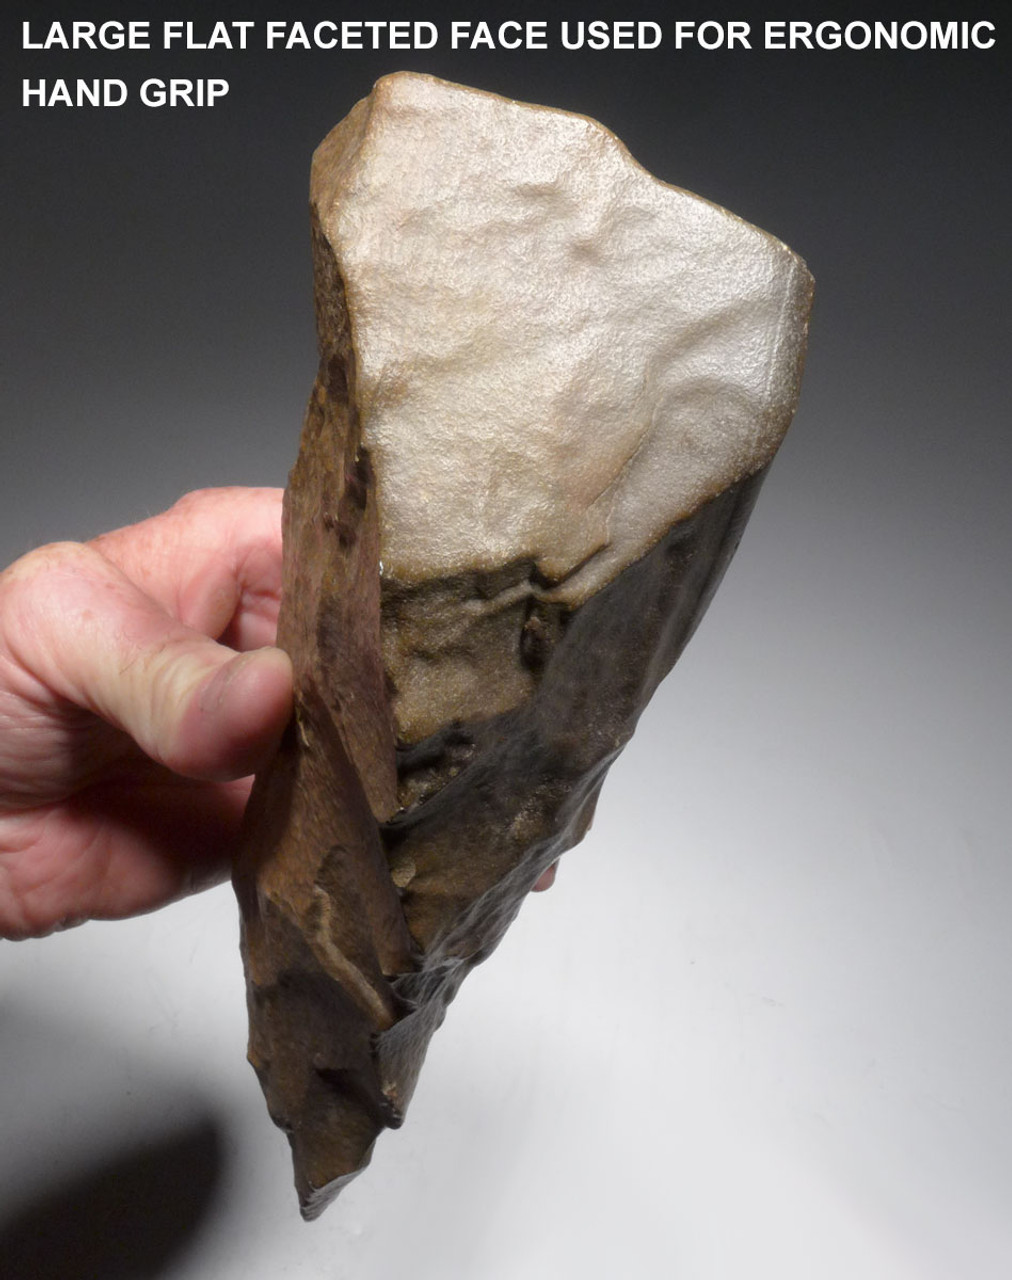 INVESTMENT-CLASS GIANT ELONGATED ACHEULEAN PRESTIGE HAND AXE MADE BY HOMO ERGASTER OF STONE AGE AFRICA  *ACH455